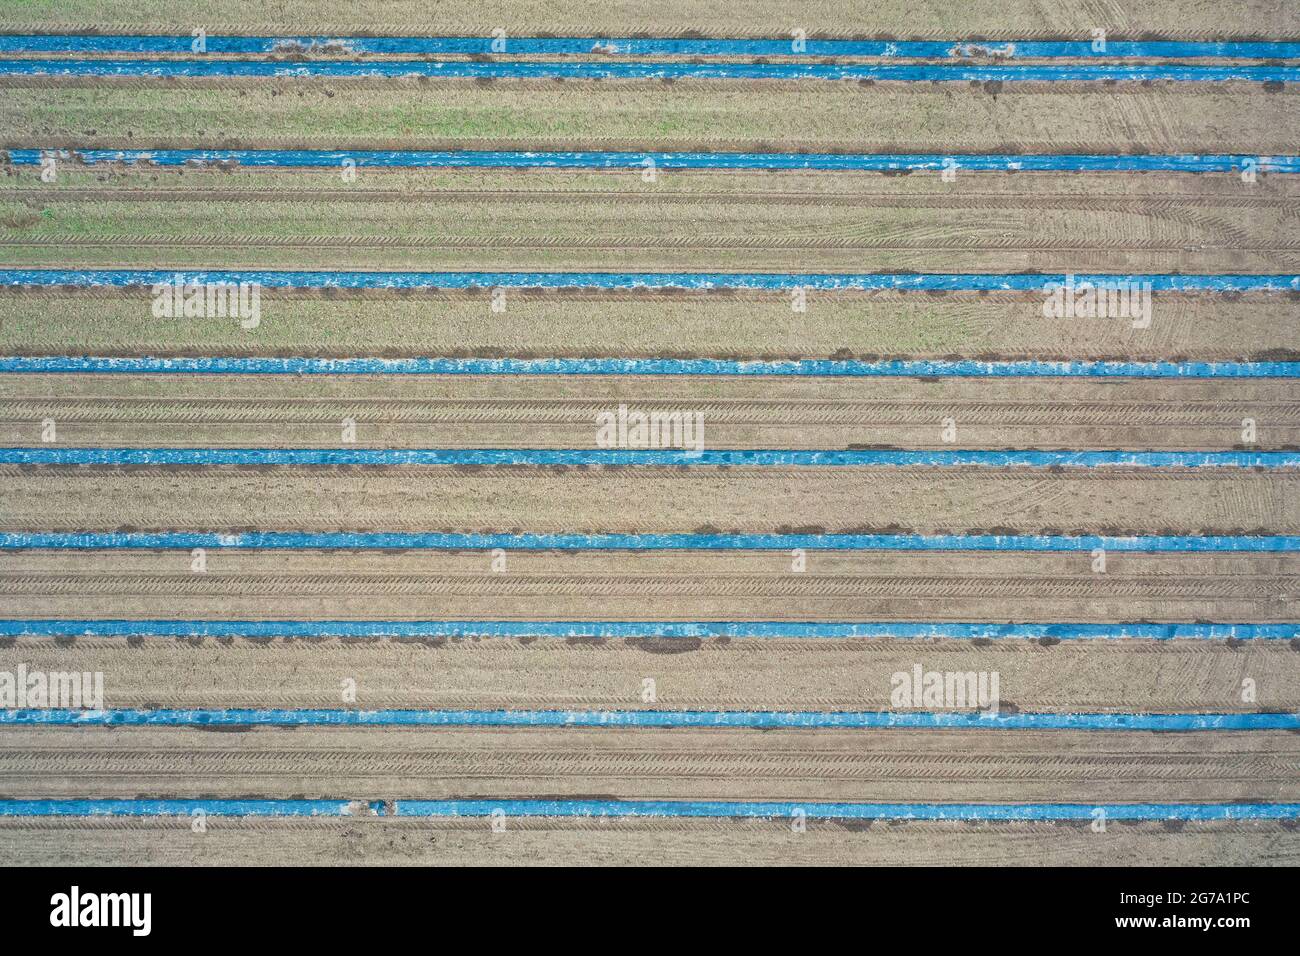 Asparagus fields from the air Stock Photo